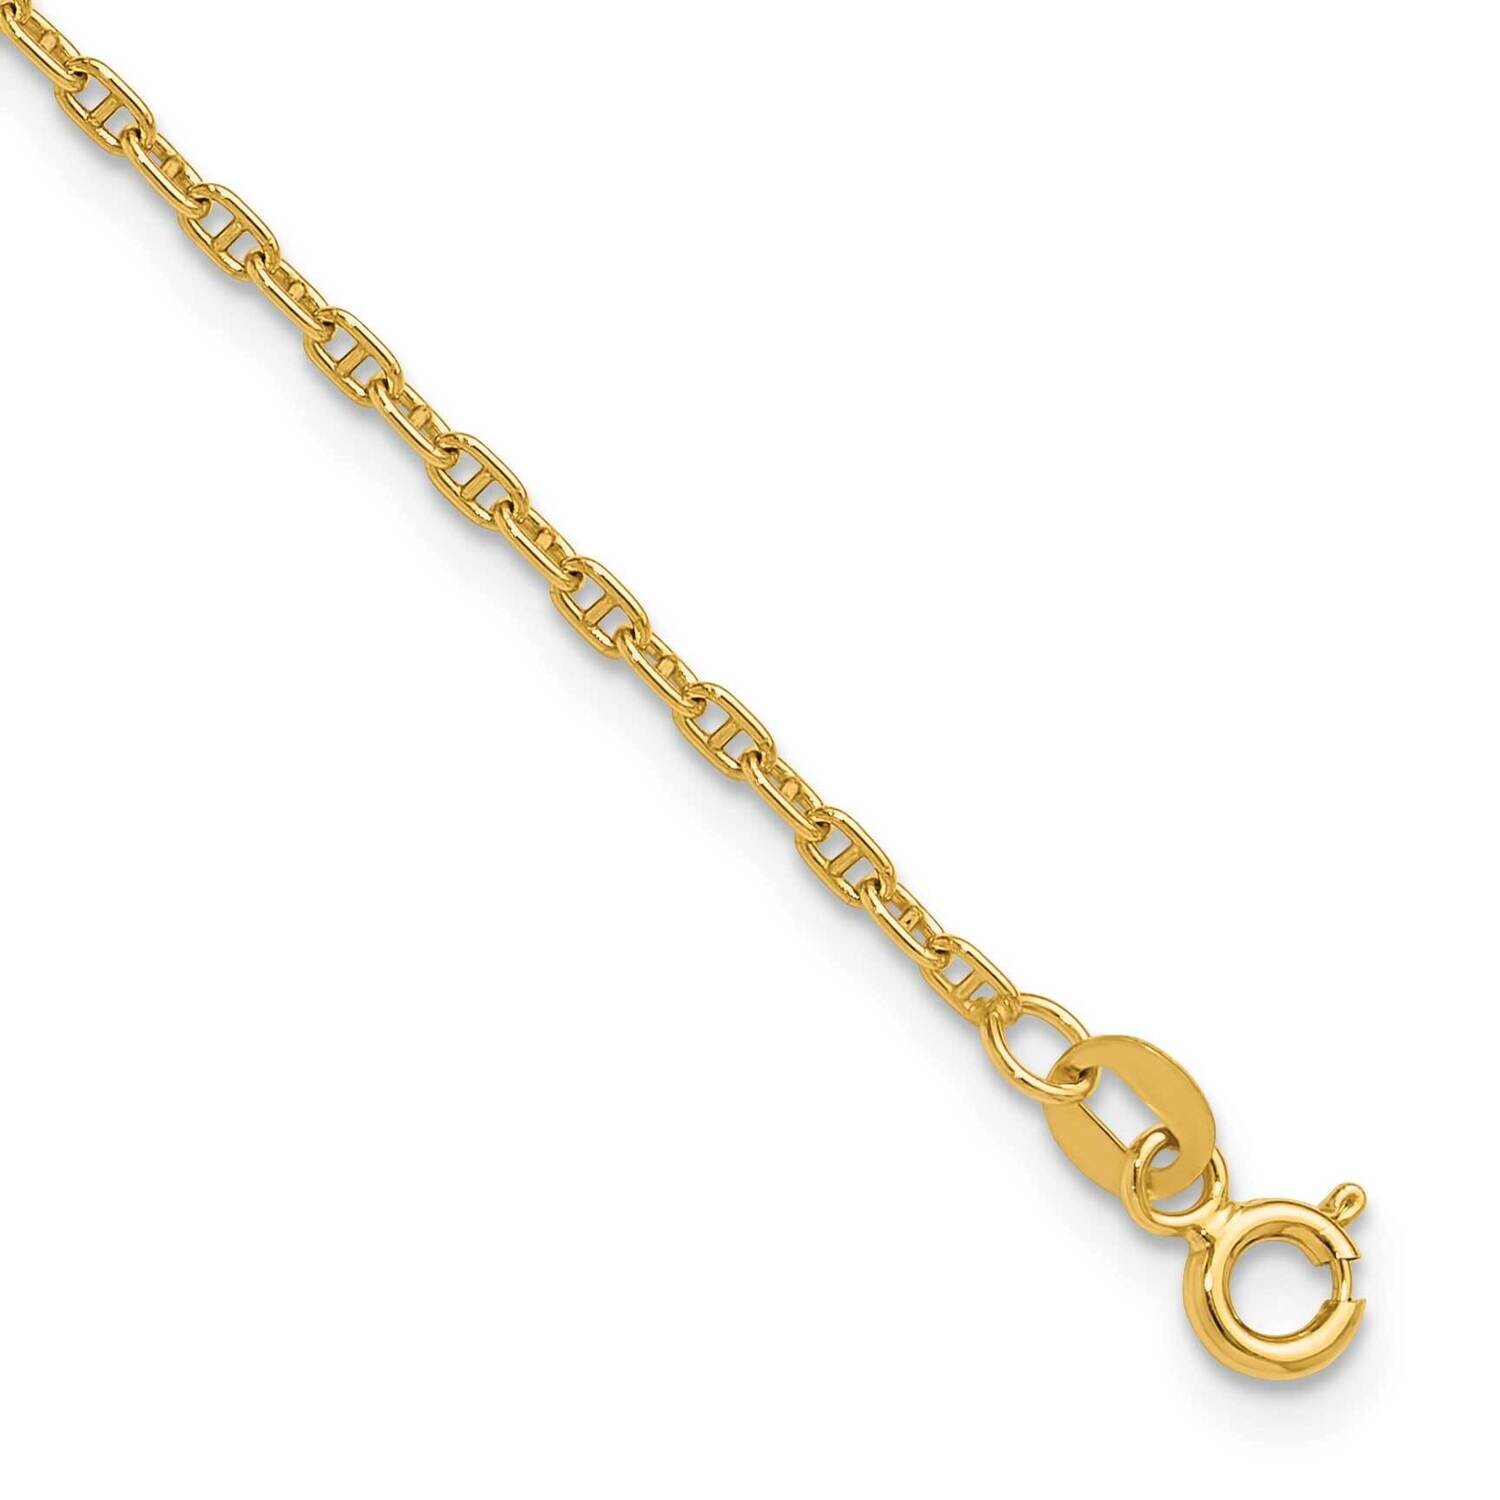 1.8mm Mariners Link Chain 7 Inch 14k Gold MA050-7